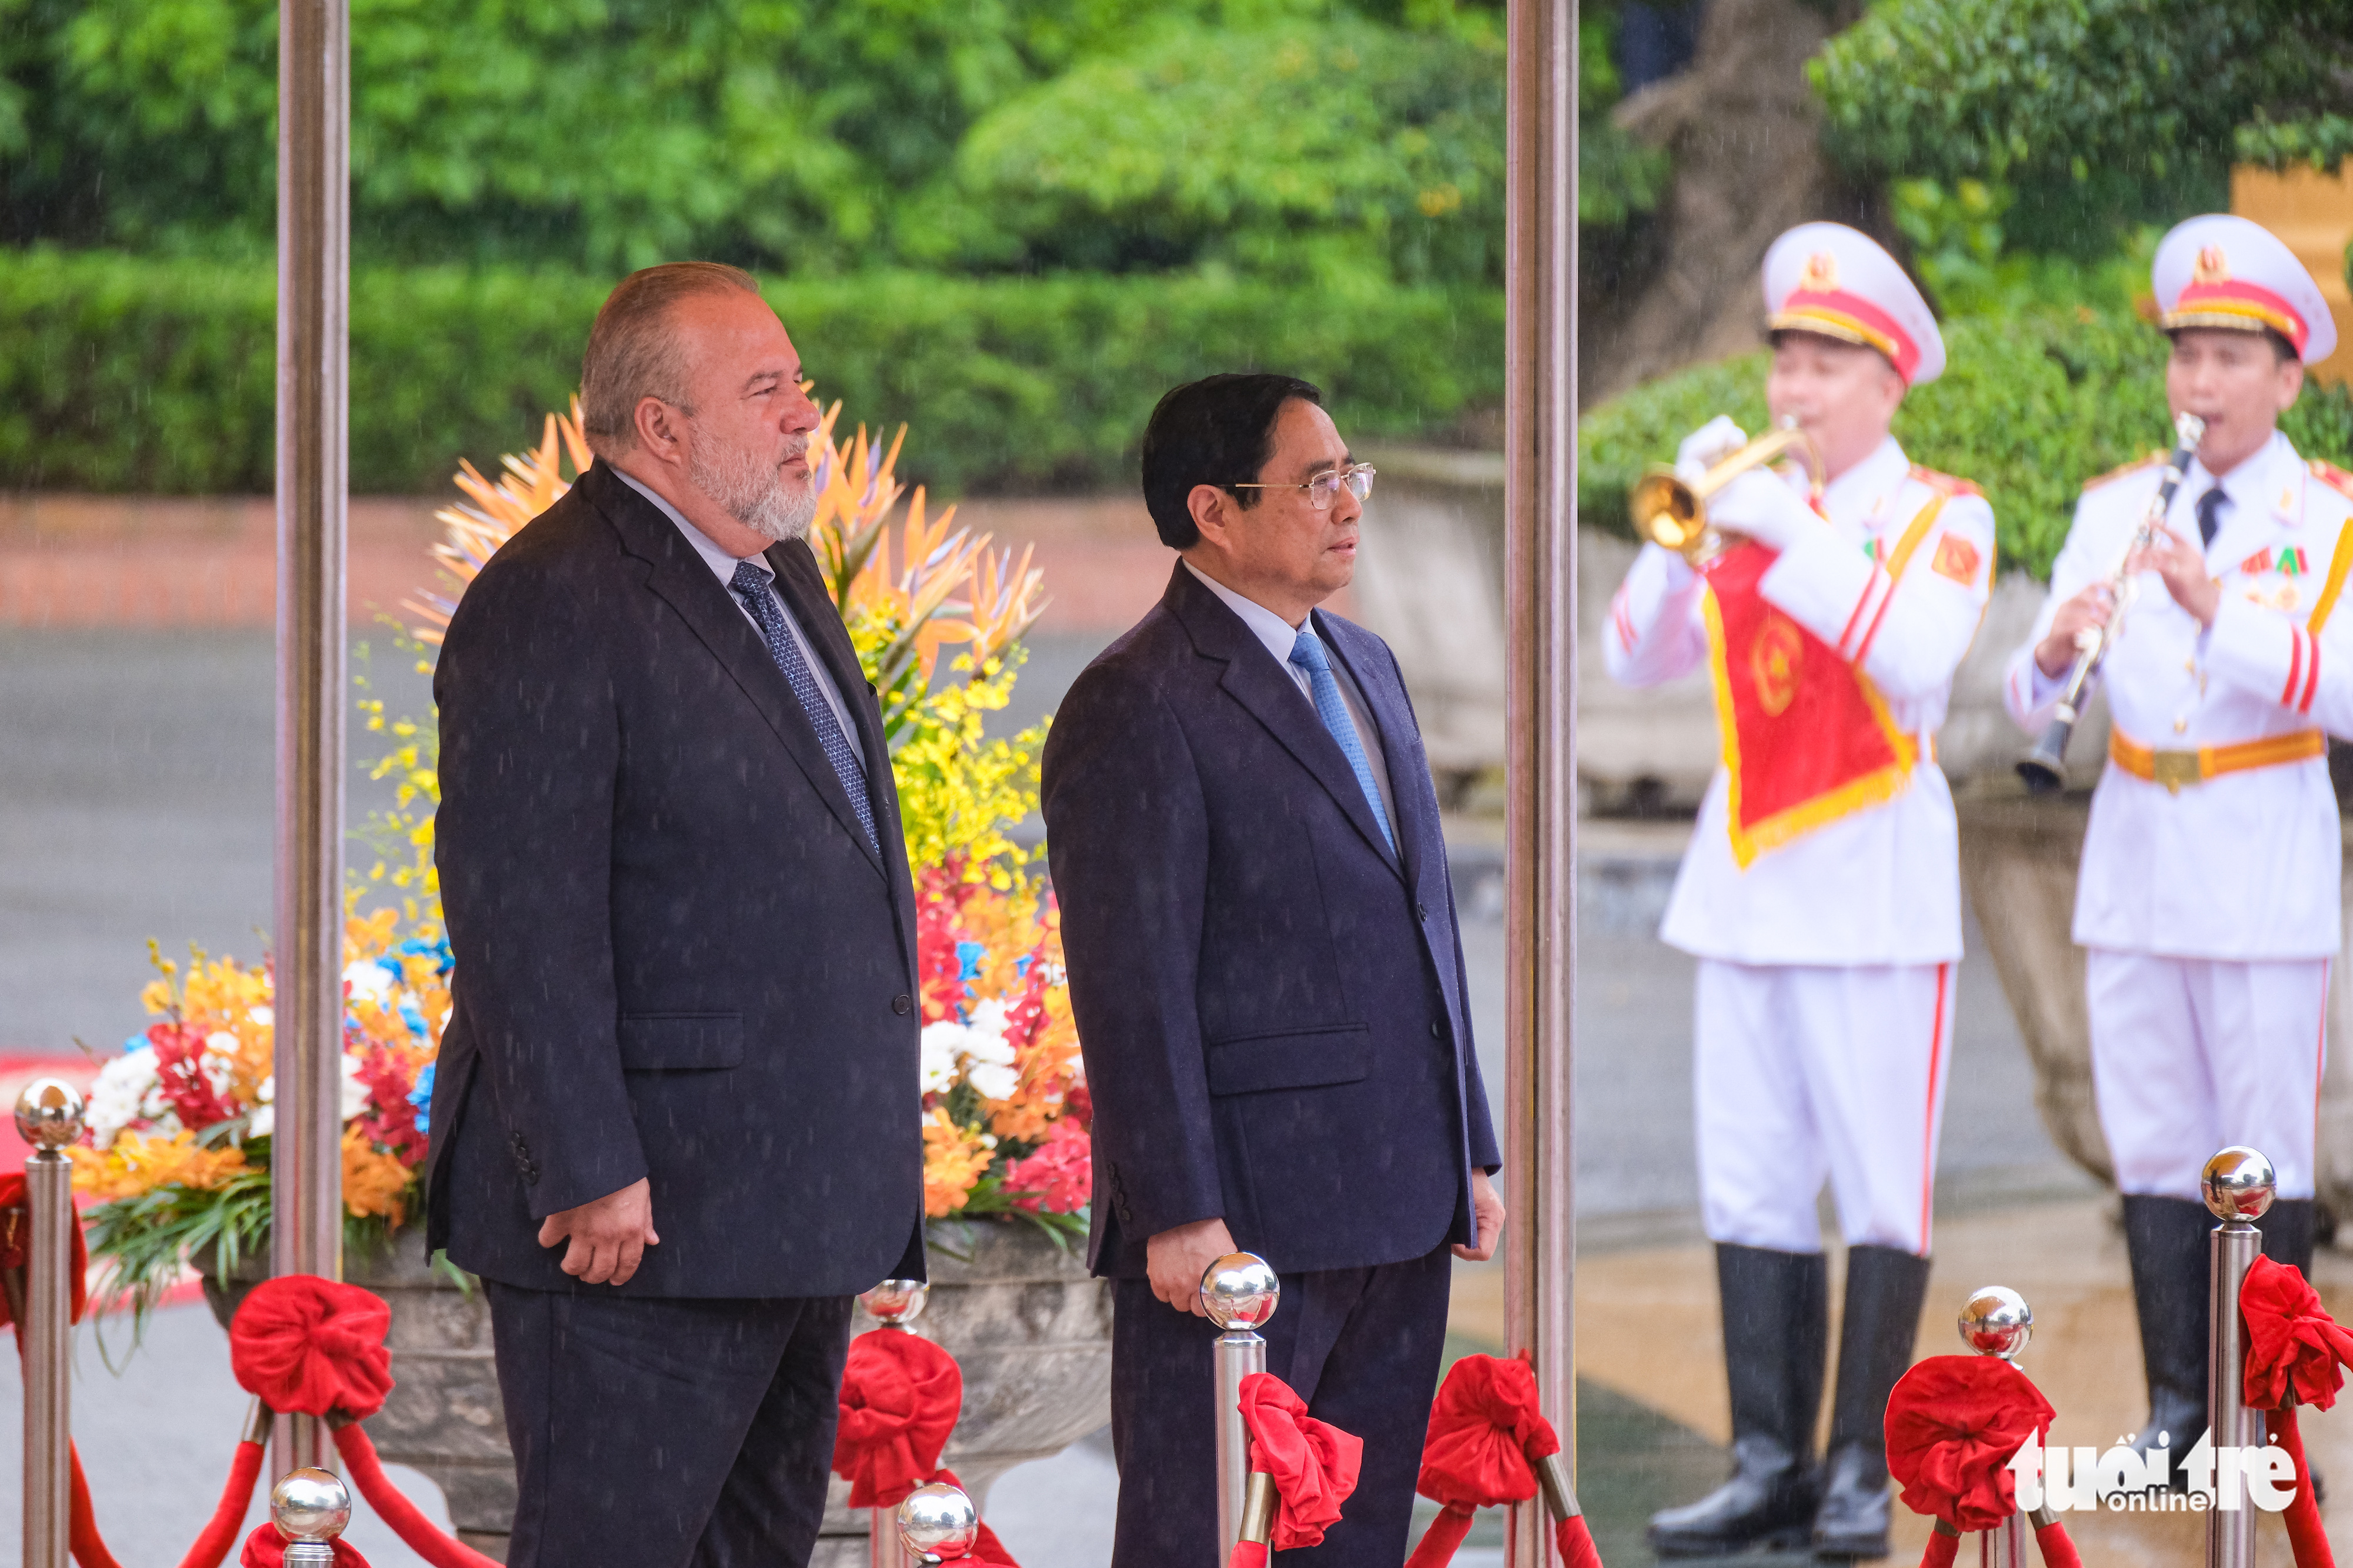 Cuban Prime Minister Manuel Marrero Cruz (L) and Vietnamese Prime Minister Pham Minh Chinh during the welcome ceremony in Hanoi, September 29, 2022. Photo: Nam Tran / Tuoi Tre